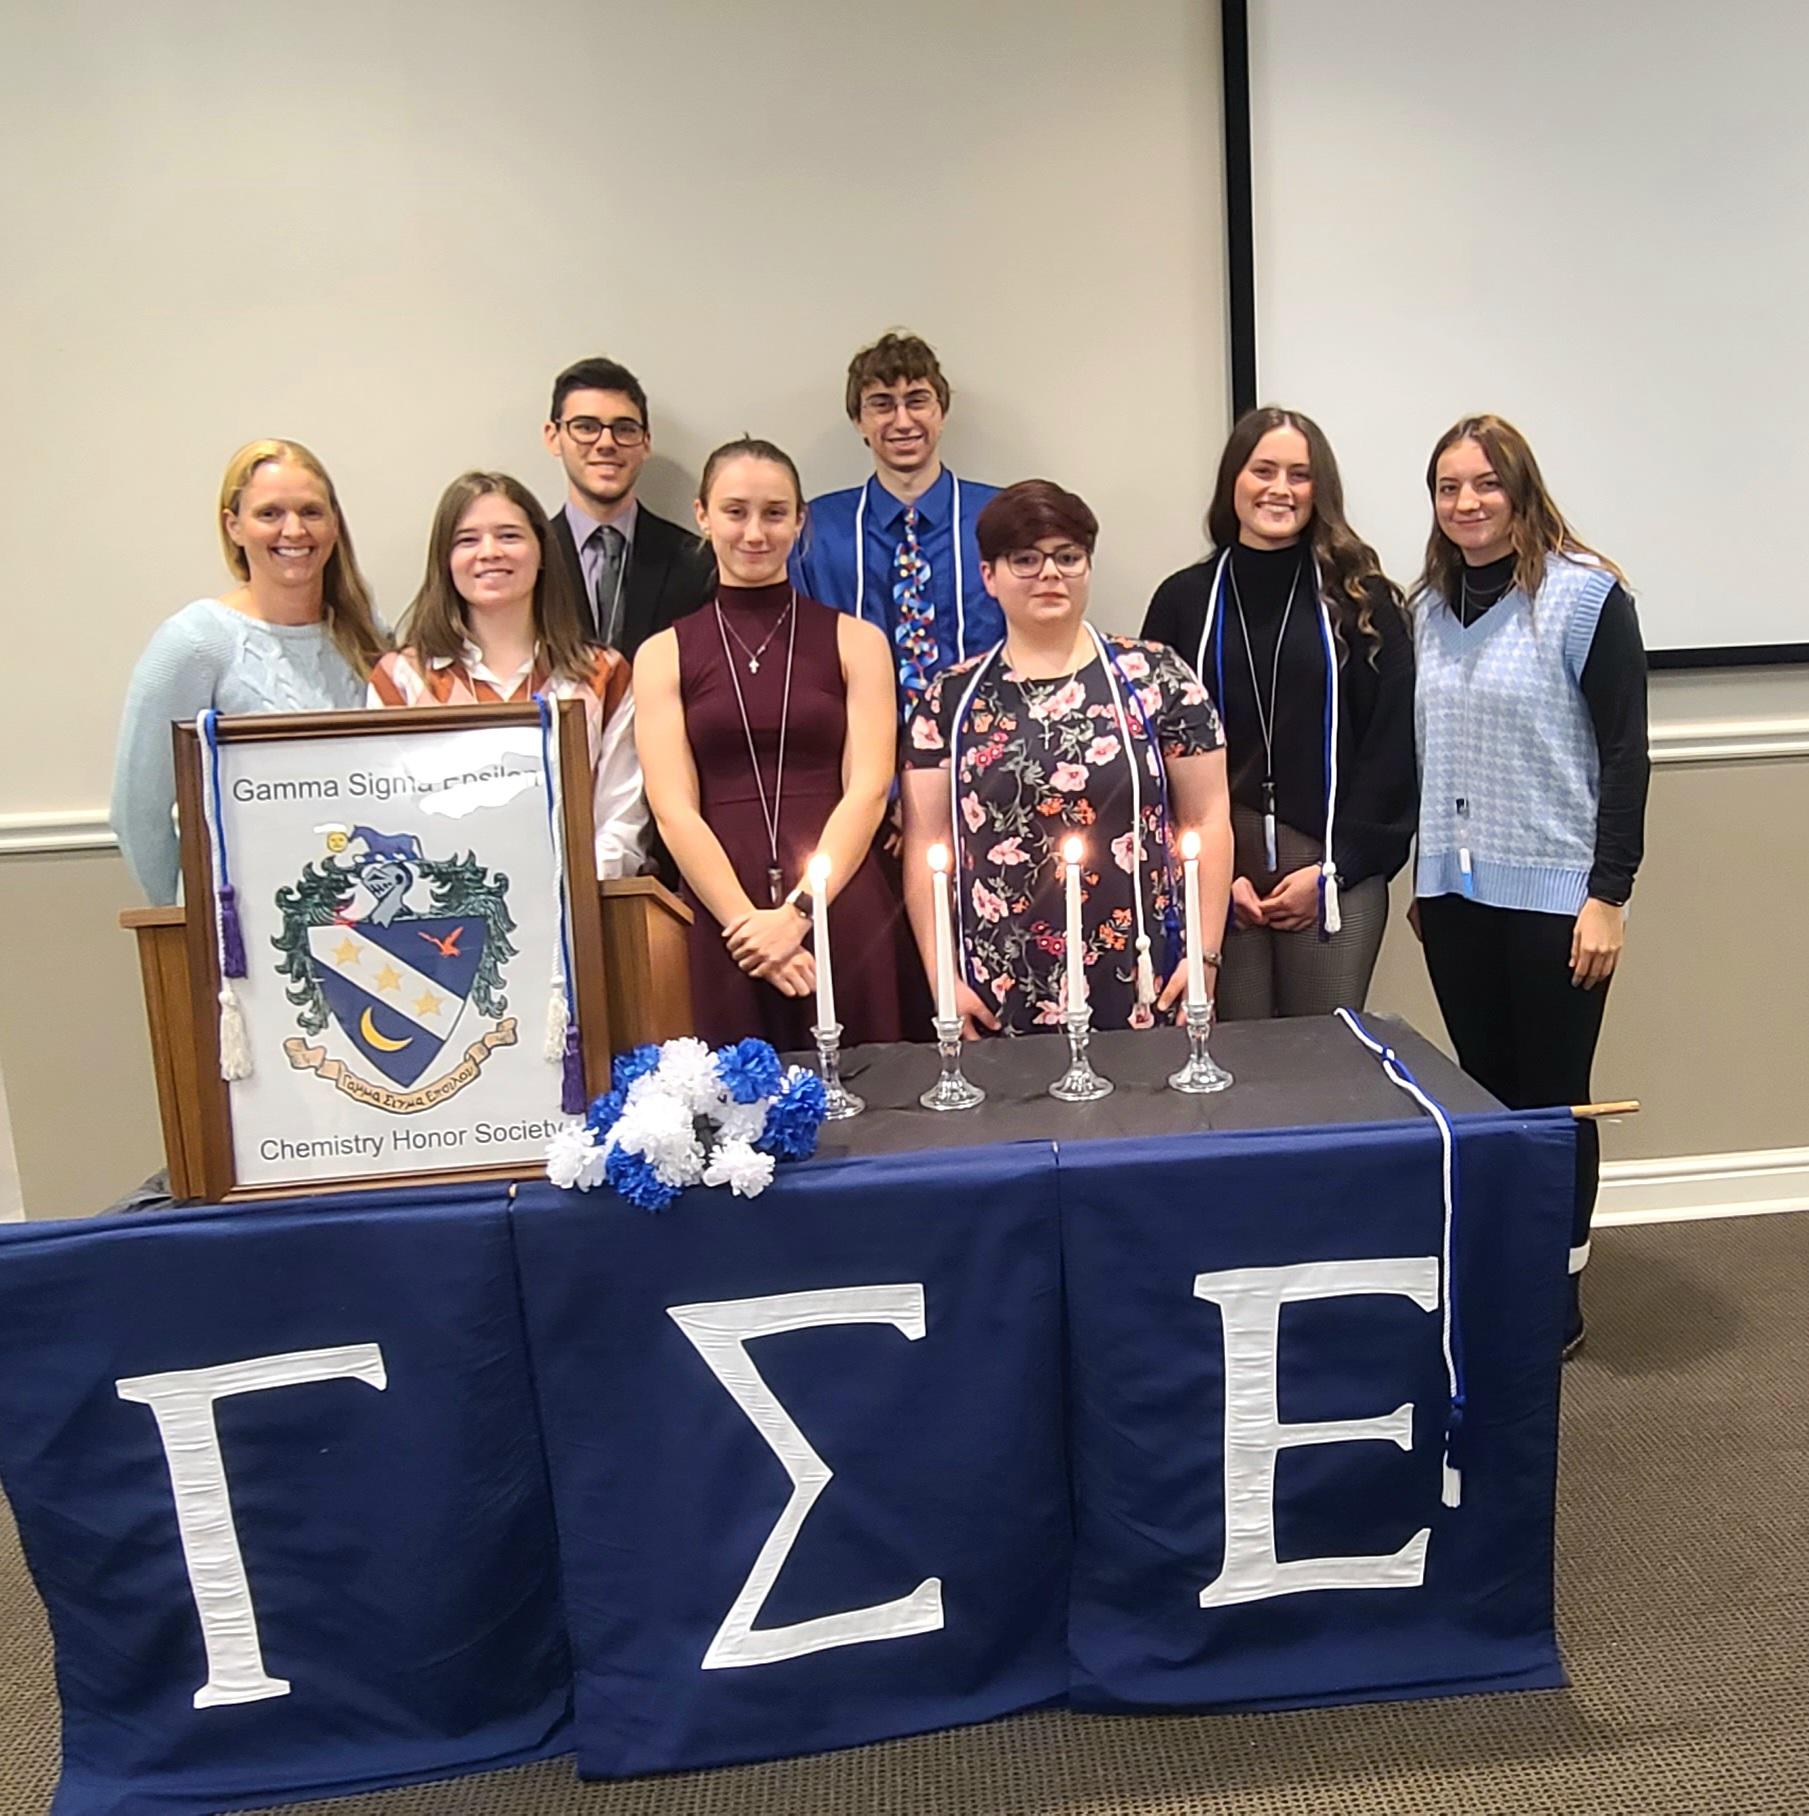 Waynesburg students are inducted into Gamma Sigma Epsilon at ceremony